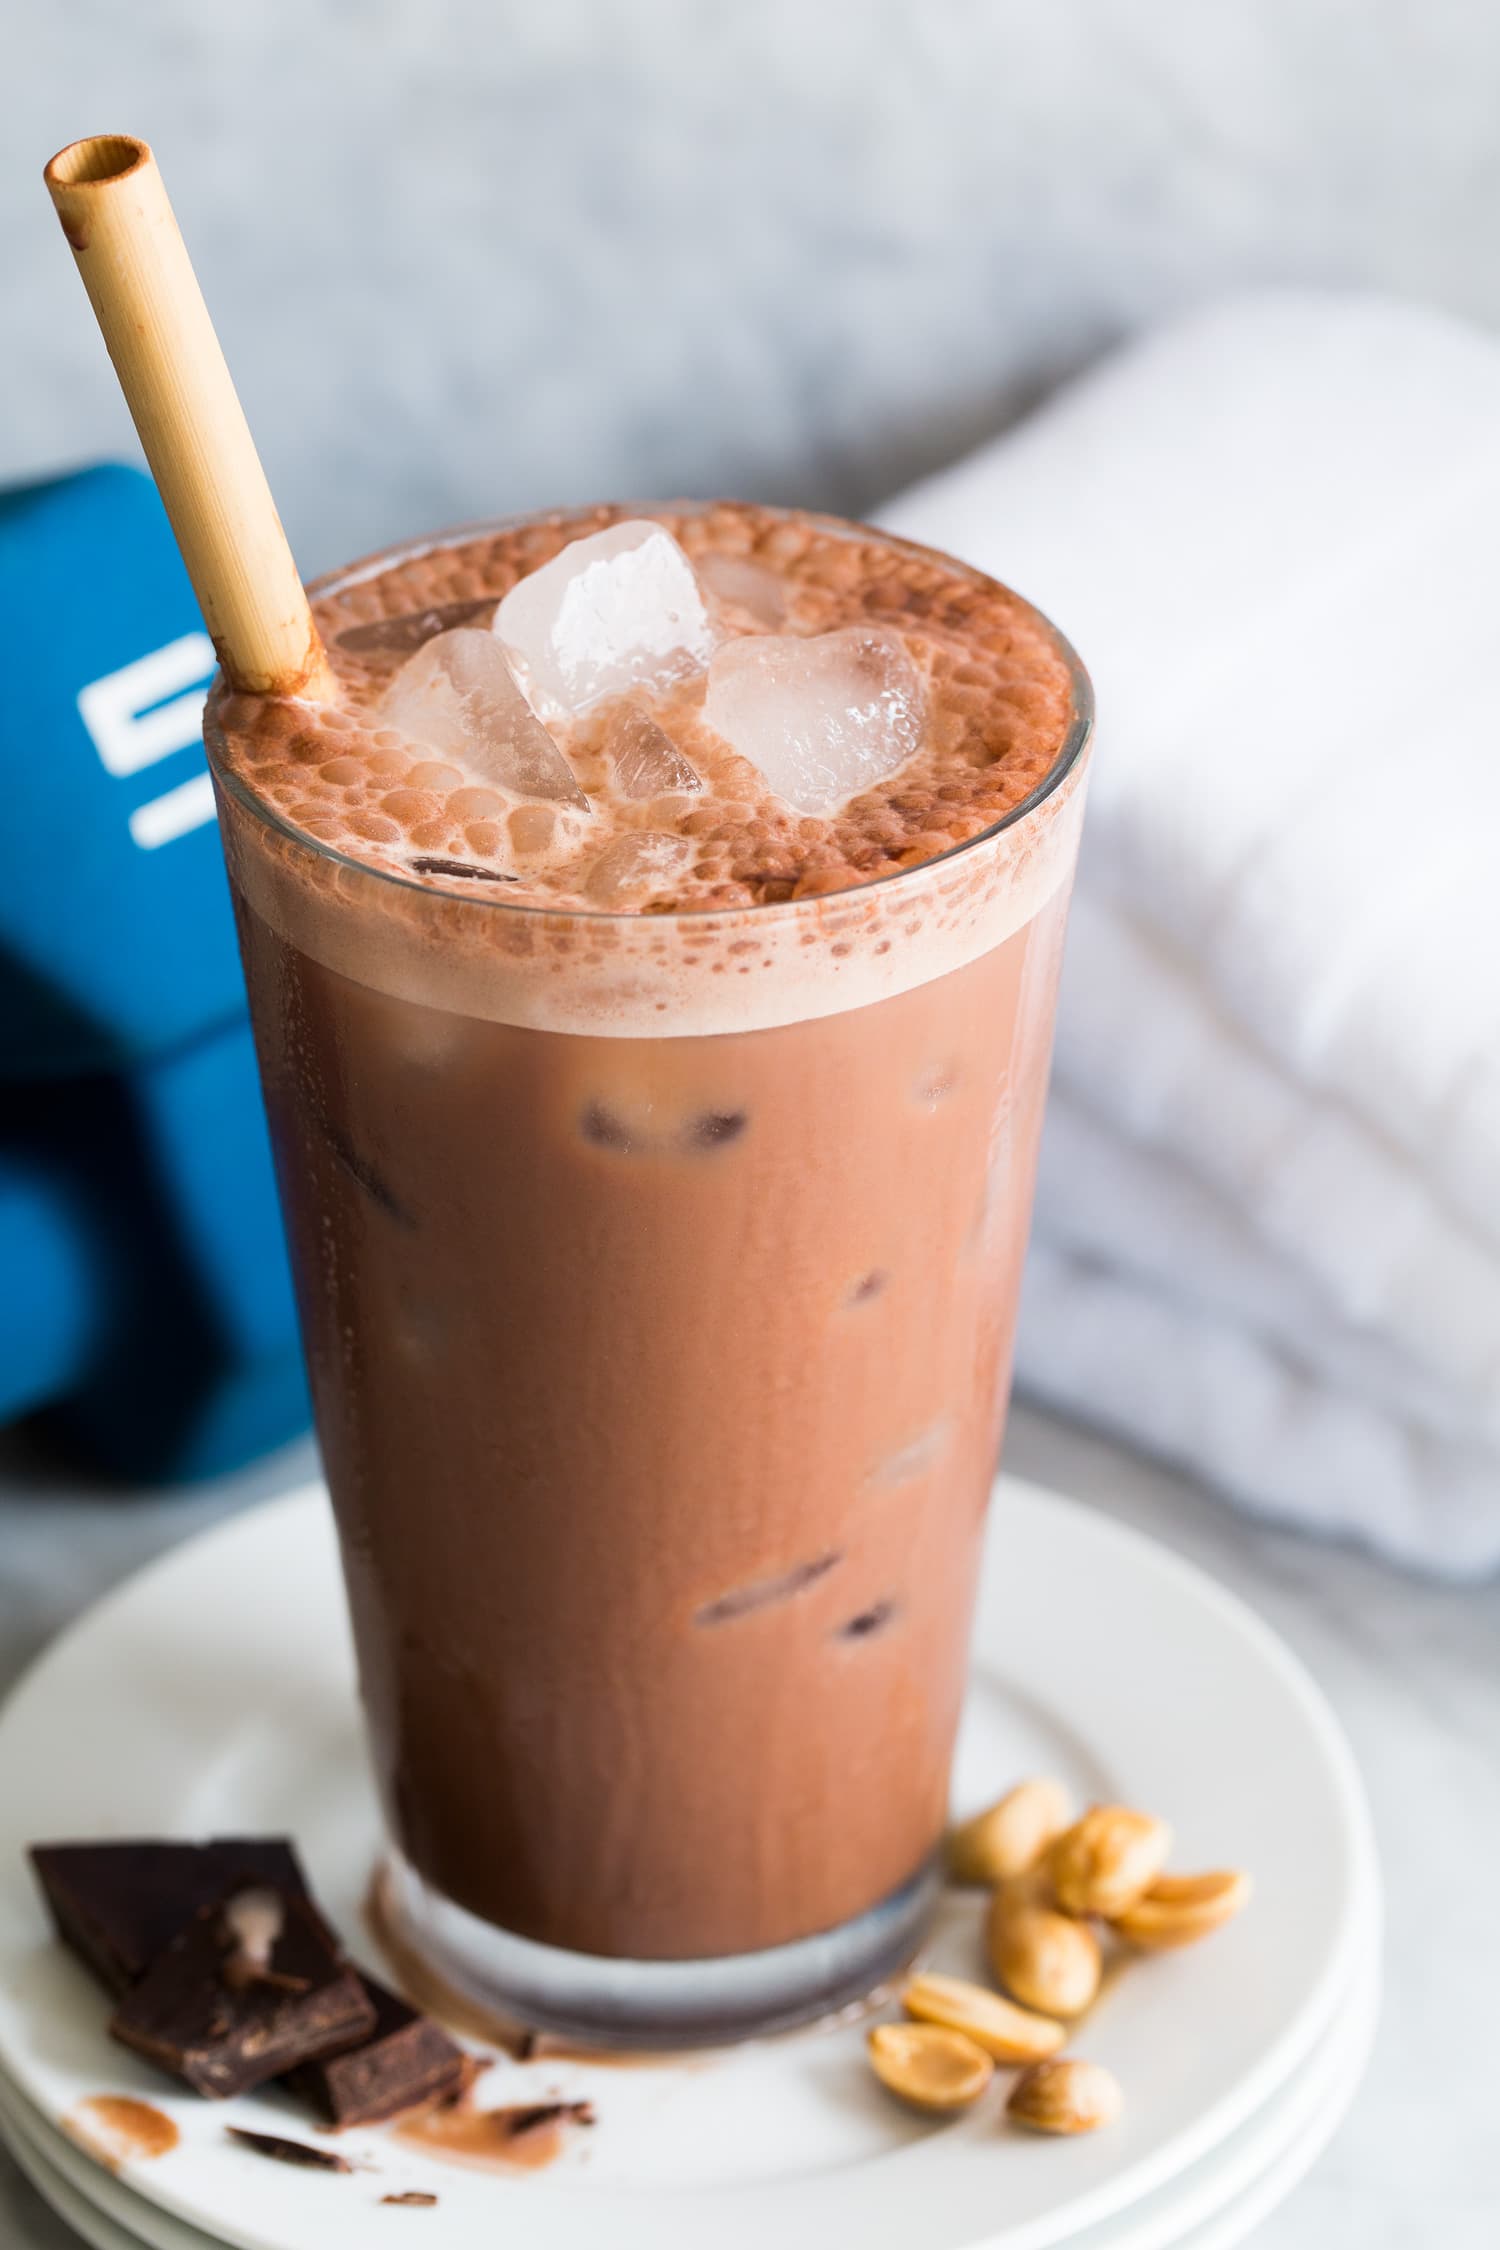 Chocolate peanut butter protein drink served with ice.